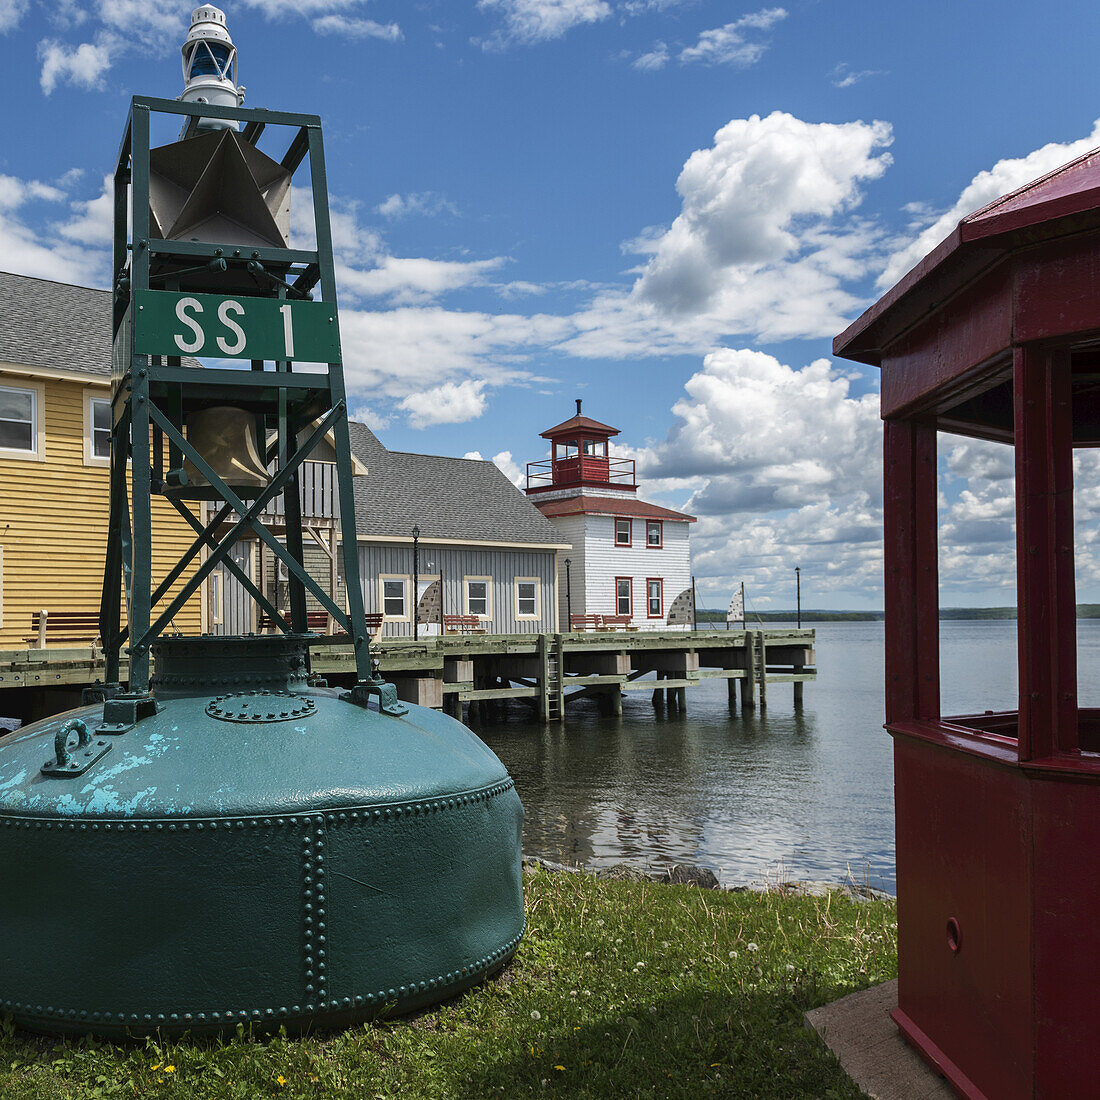 Large Buoy On The Shore And Buildings Along The Waterfront; Pictou, Nova Scotia, Canada